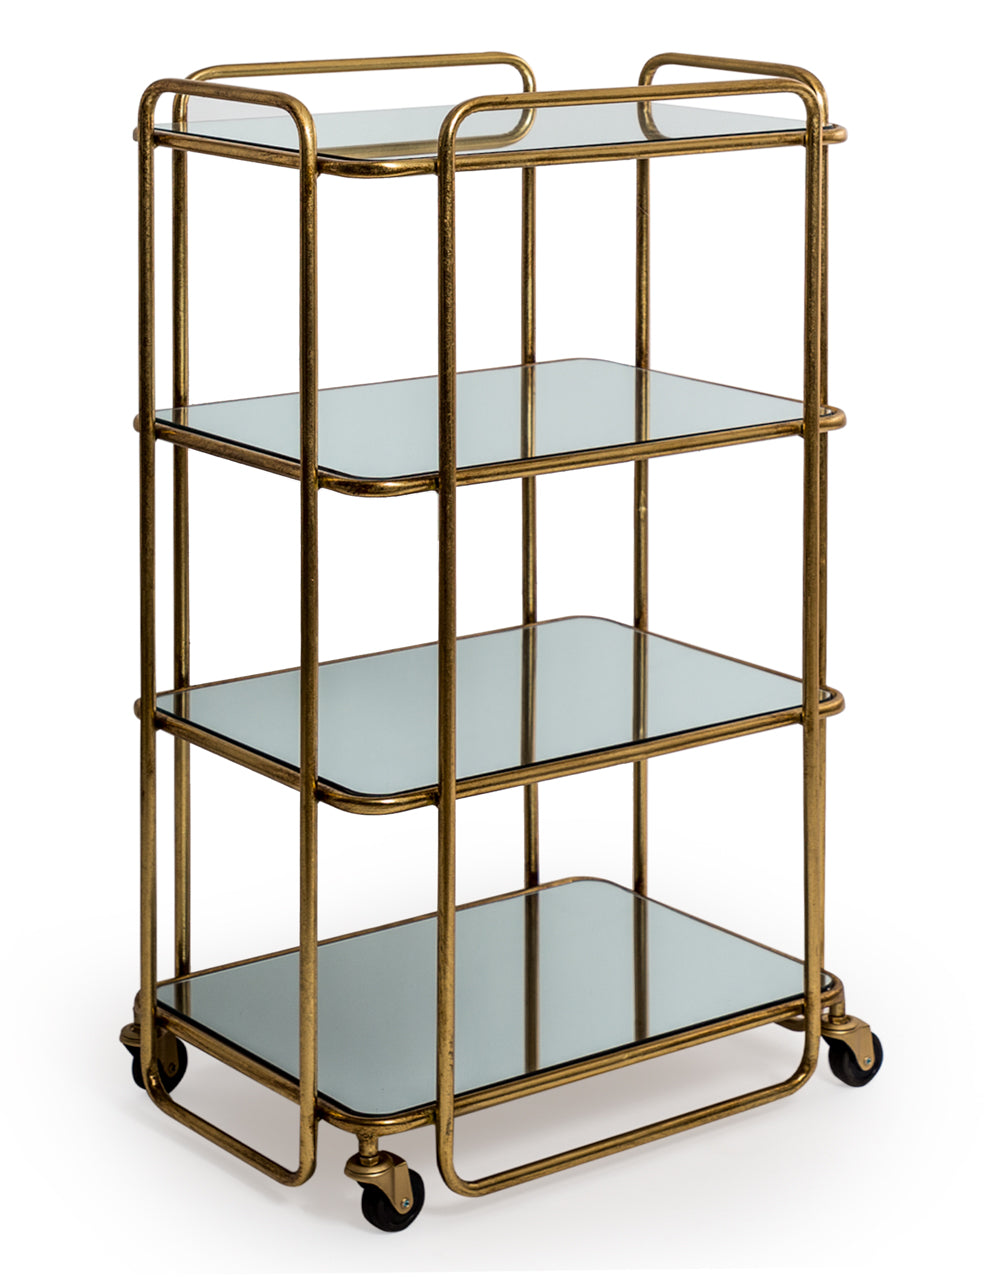 Antique Gold/Bronze Leaf Metal Bar Trolley with Mirror Shelves